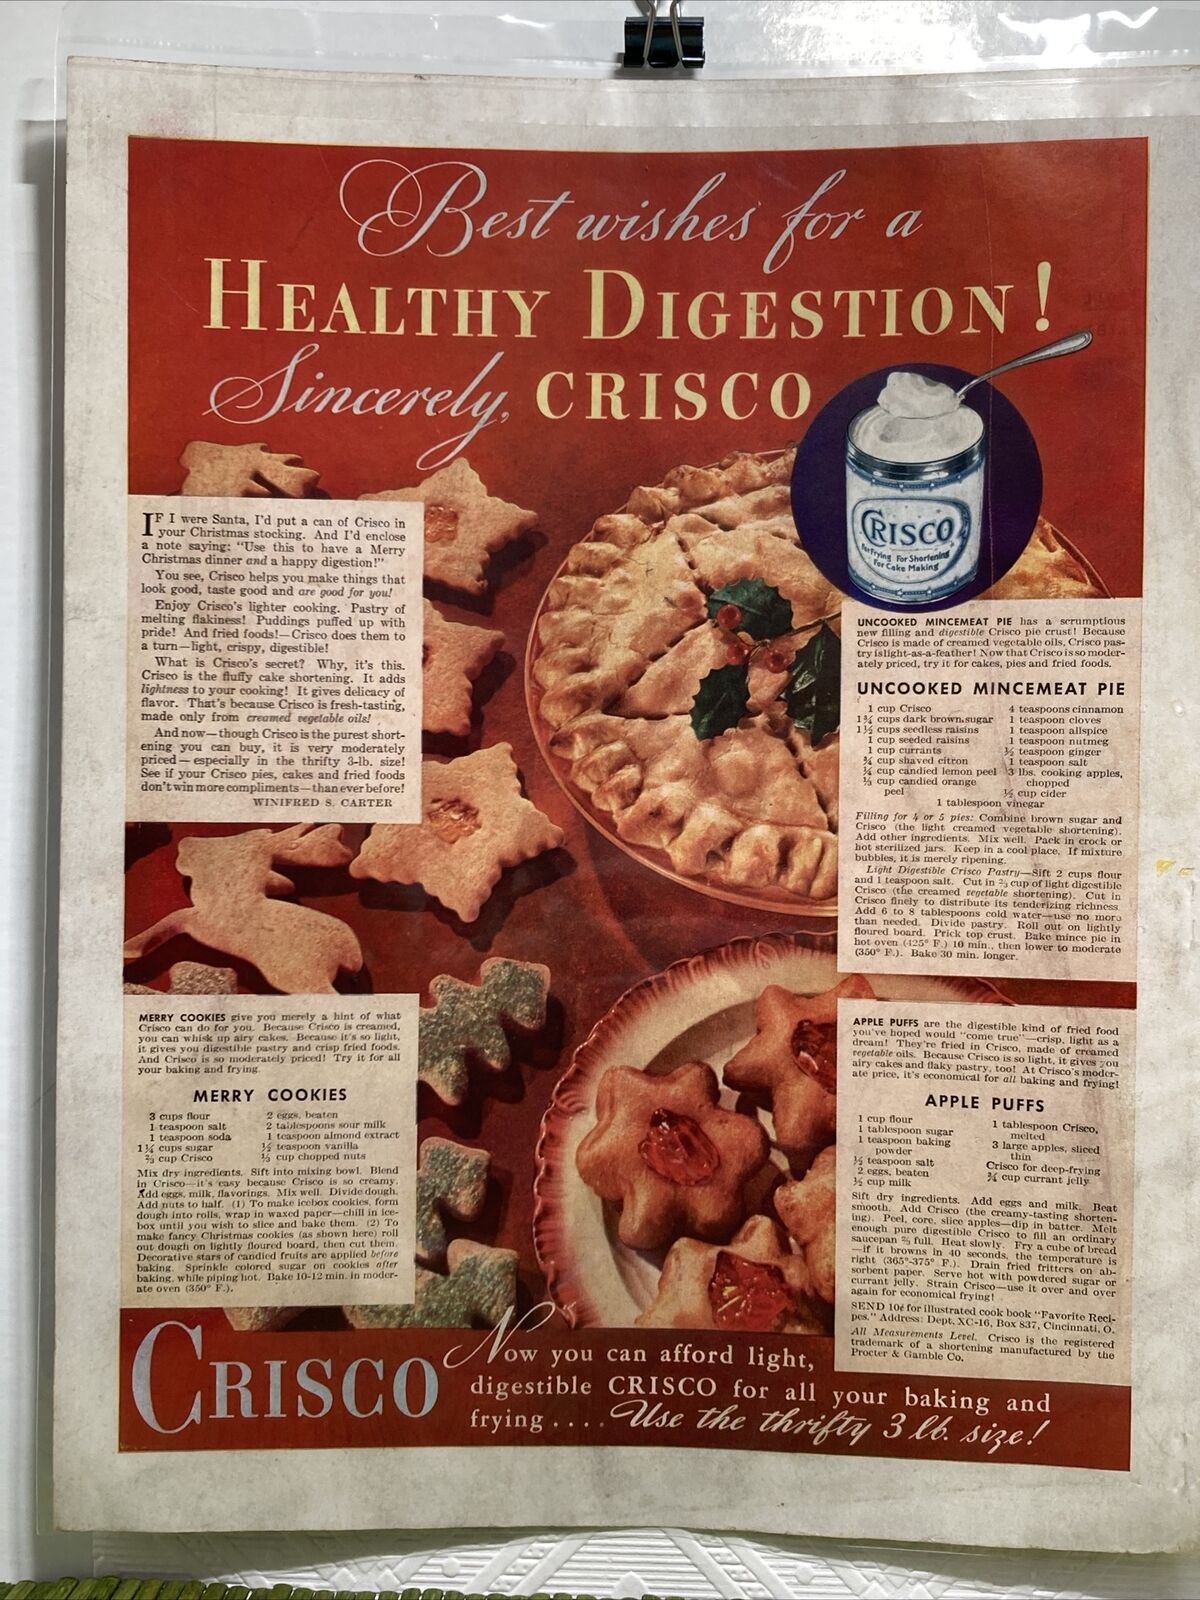 1936 Vintage Print Ad Crisco Recipes Merry Cookies Mincemeat Apple Puffs